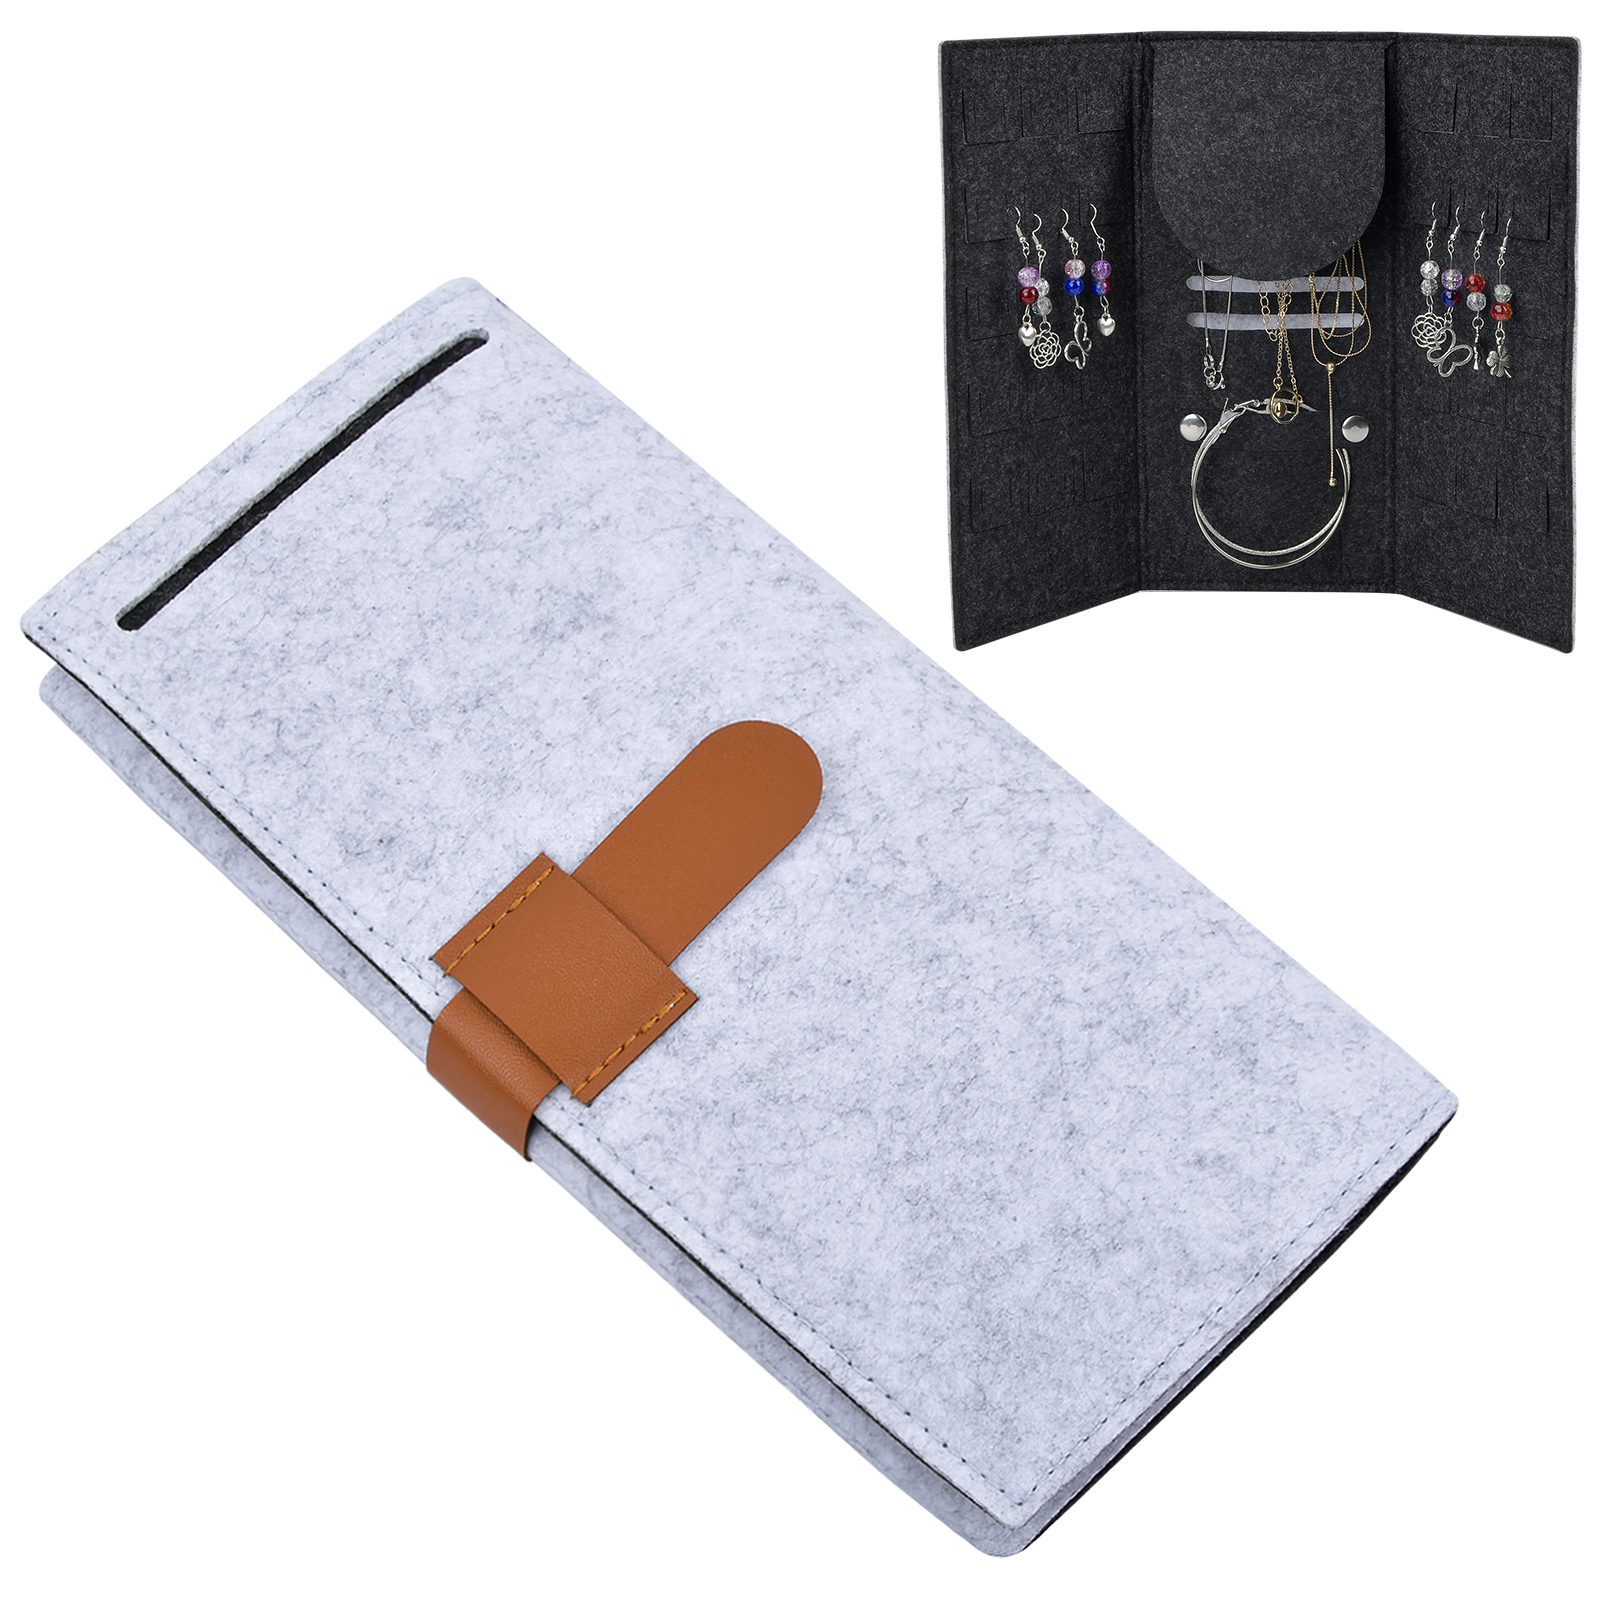 Travel Foldable Jewelry Organizer Case for Rings, Necklaces, Bracelets,  Earrings